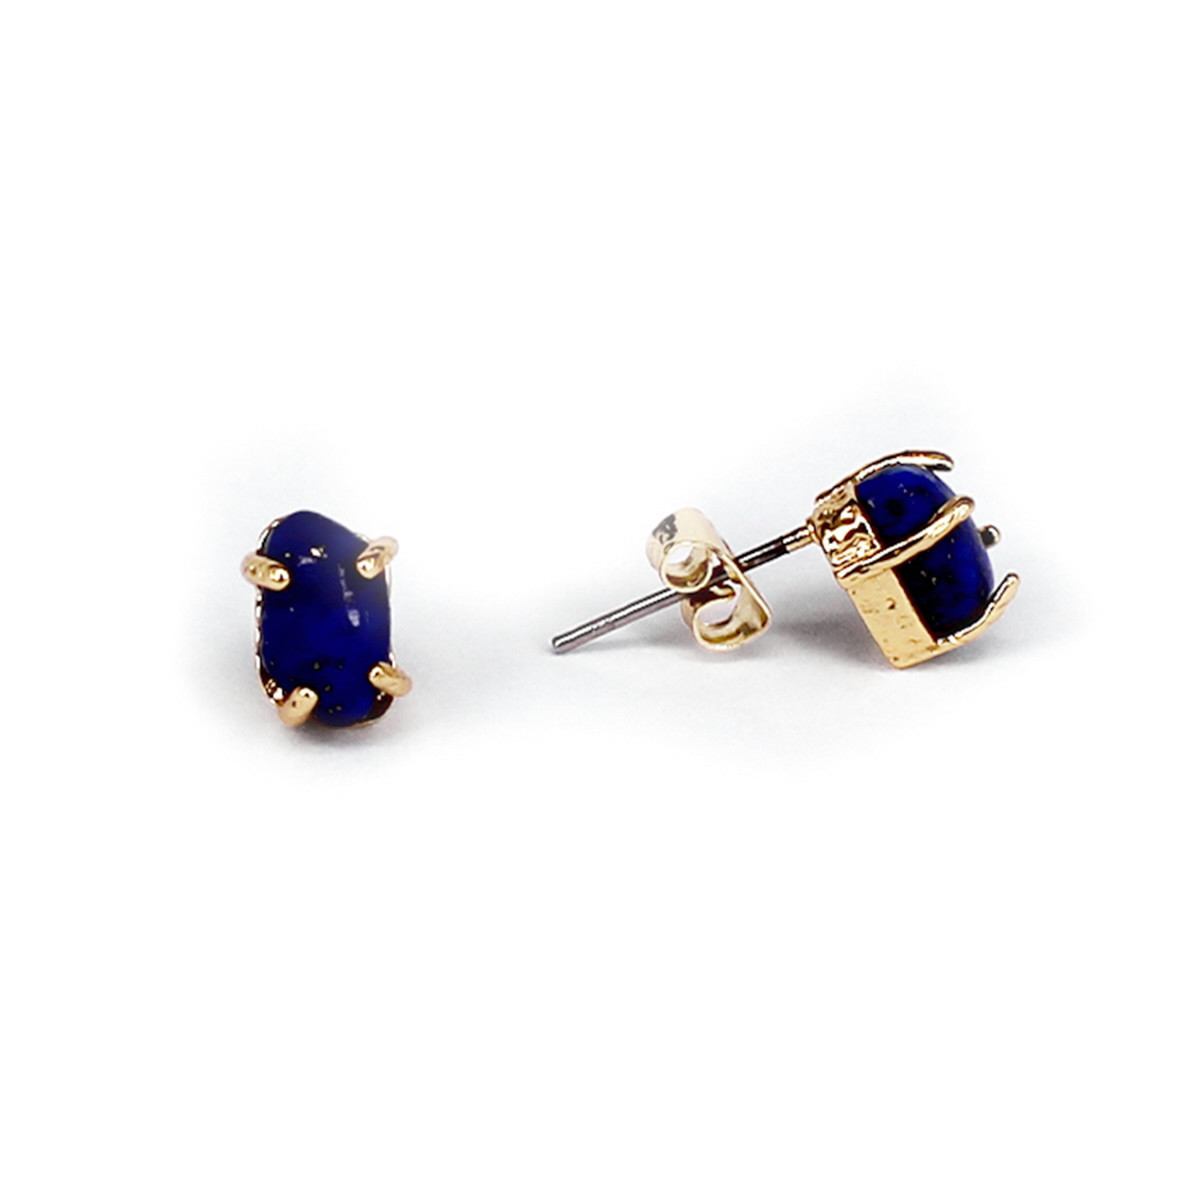 GOLDEN EARRINGS WITH BLUE STONE